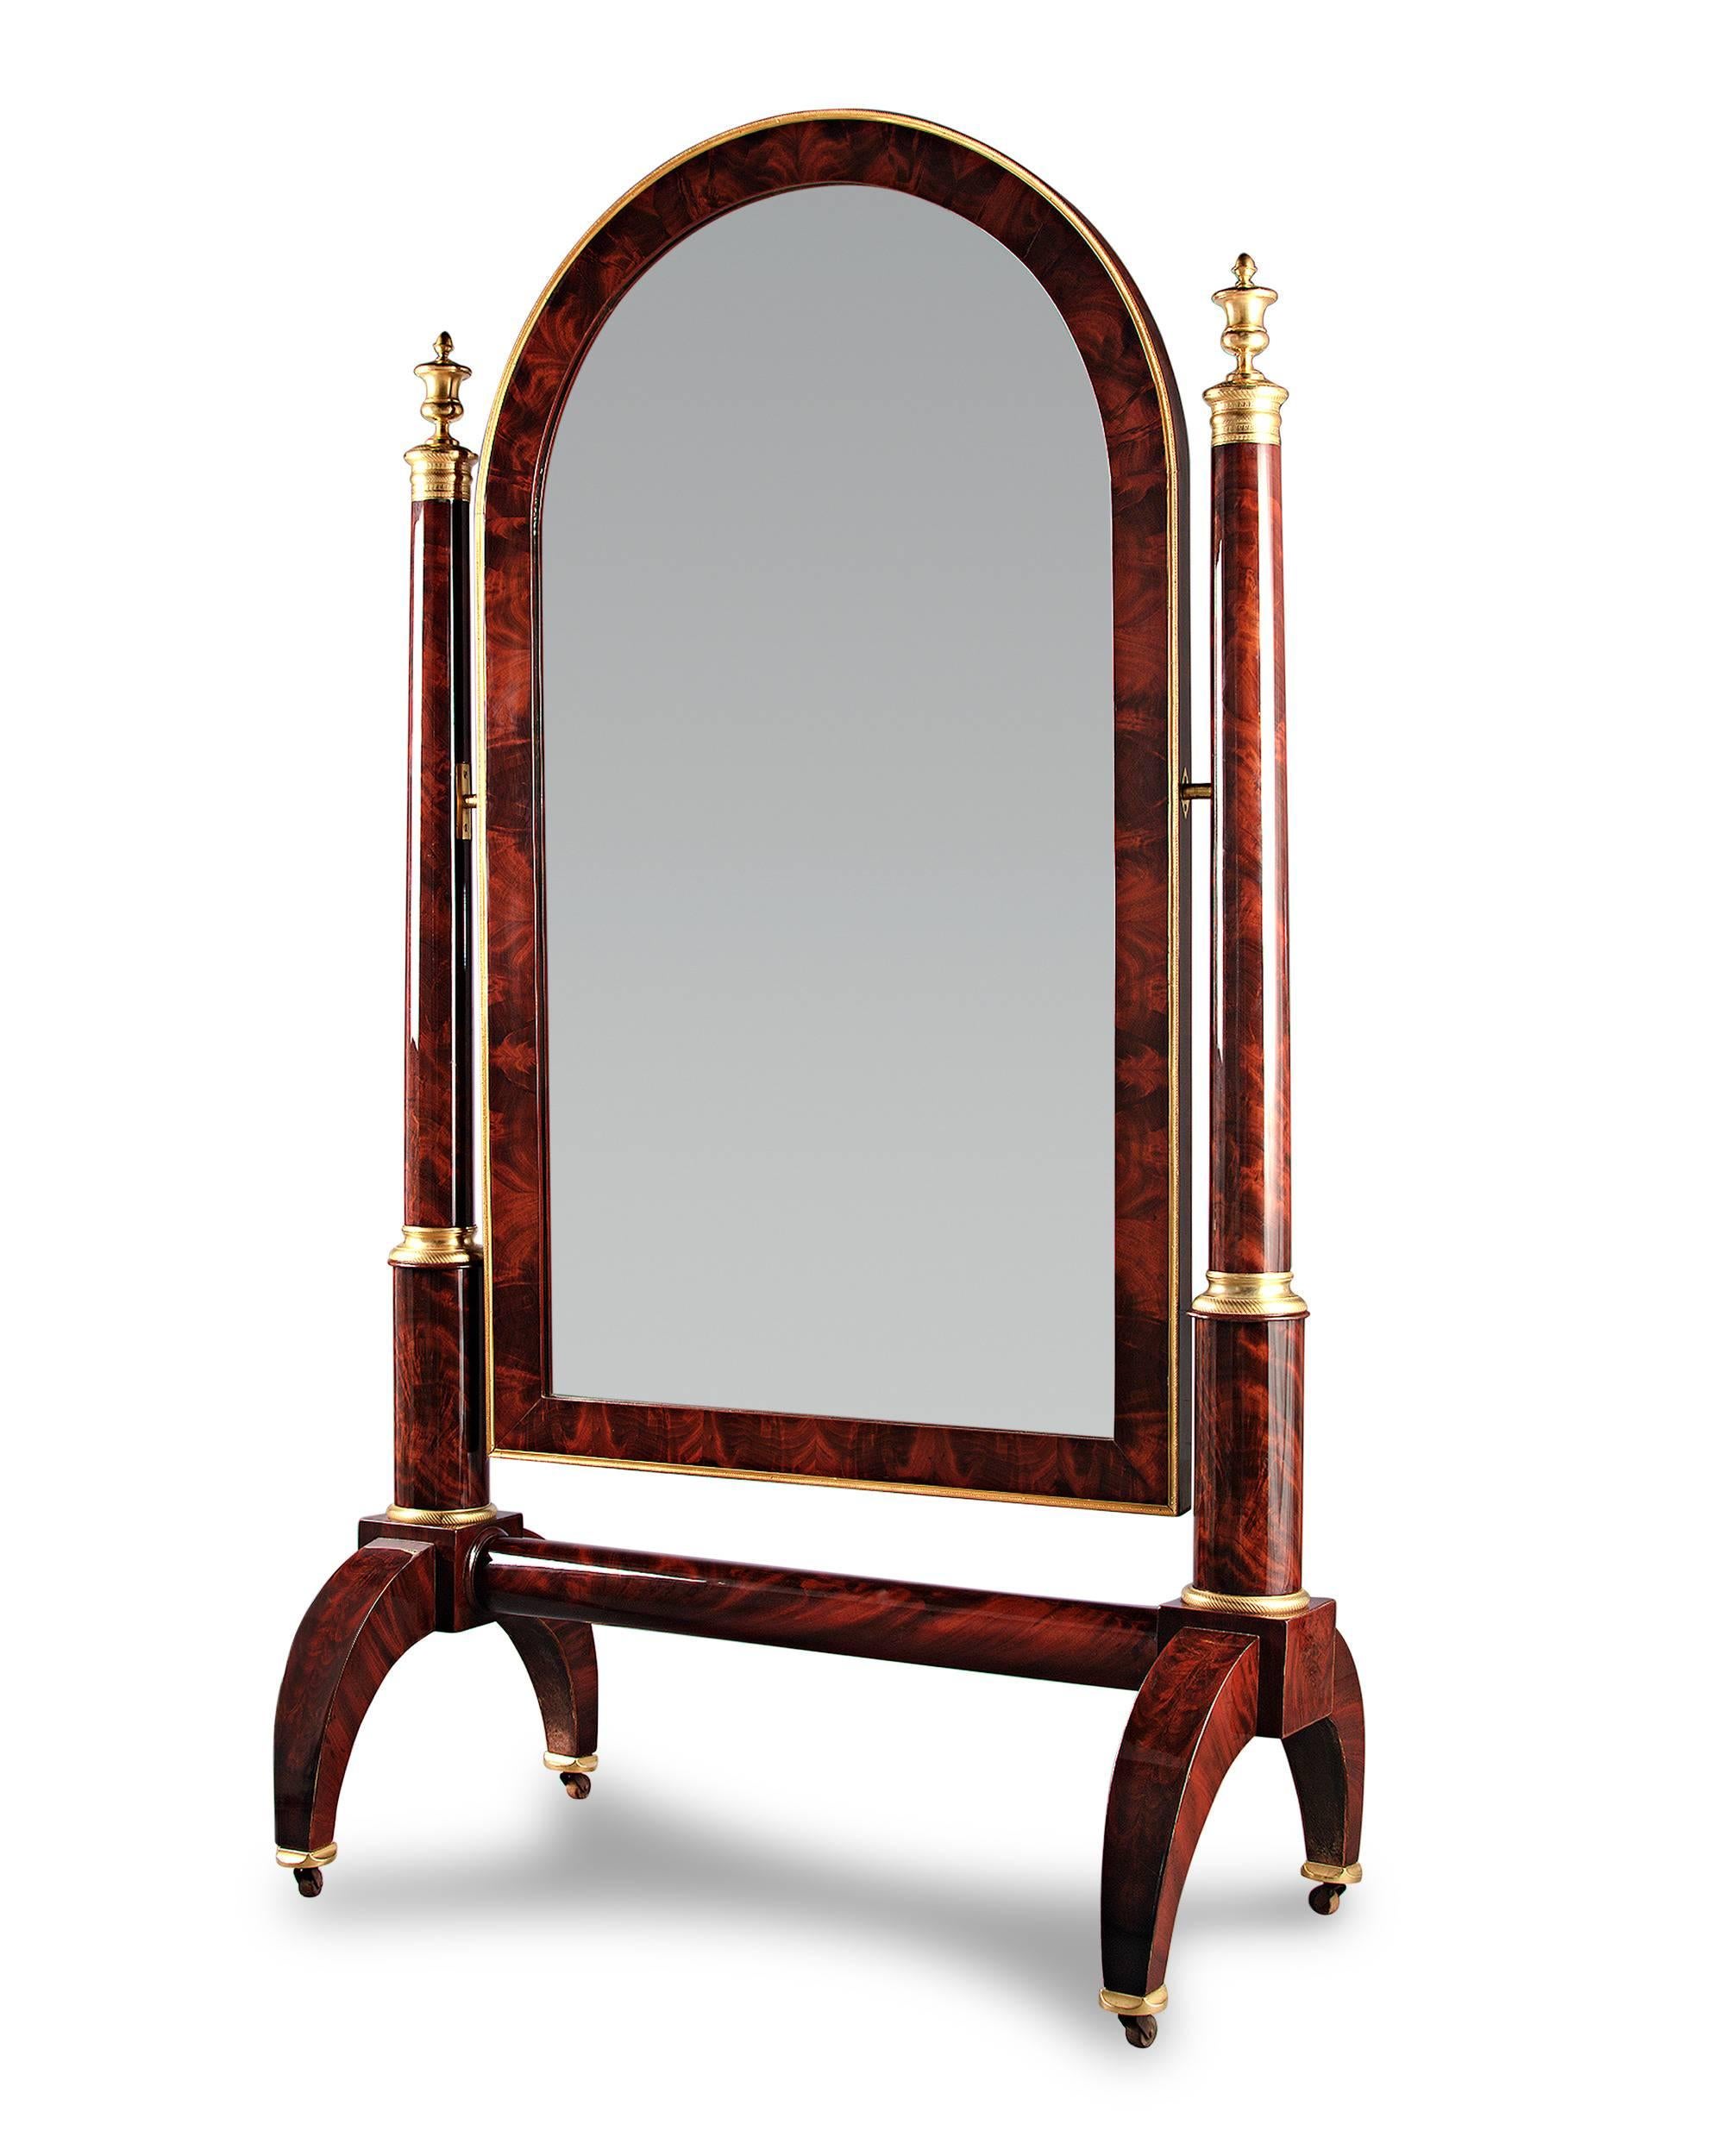 This magnificent French cheval mirror captures the luxury of the Empire period in grand style. Crafted of mahogany, the period piece is graced by intricate doré bronze mounts that embody the classically-inspired style of the Napoléonic era. Elegant